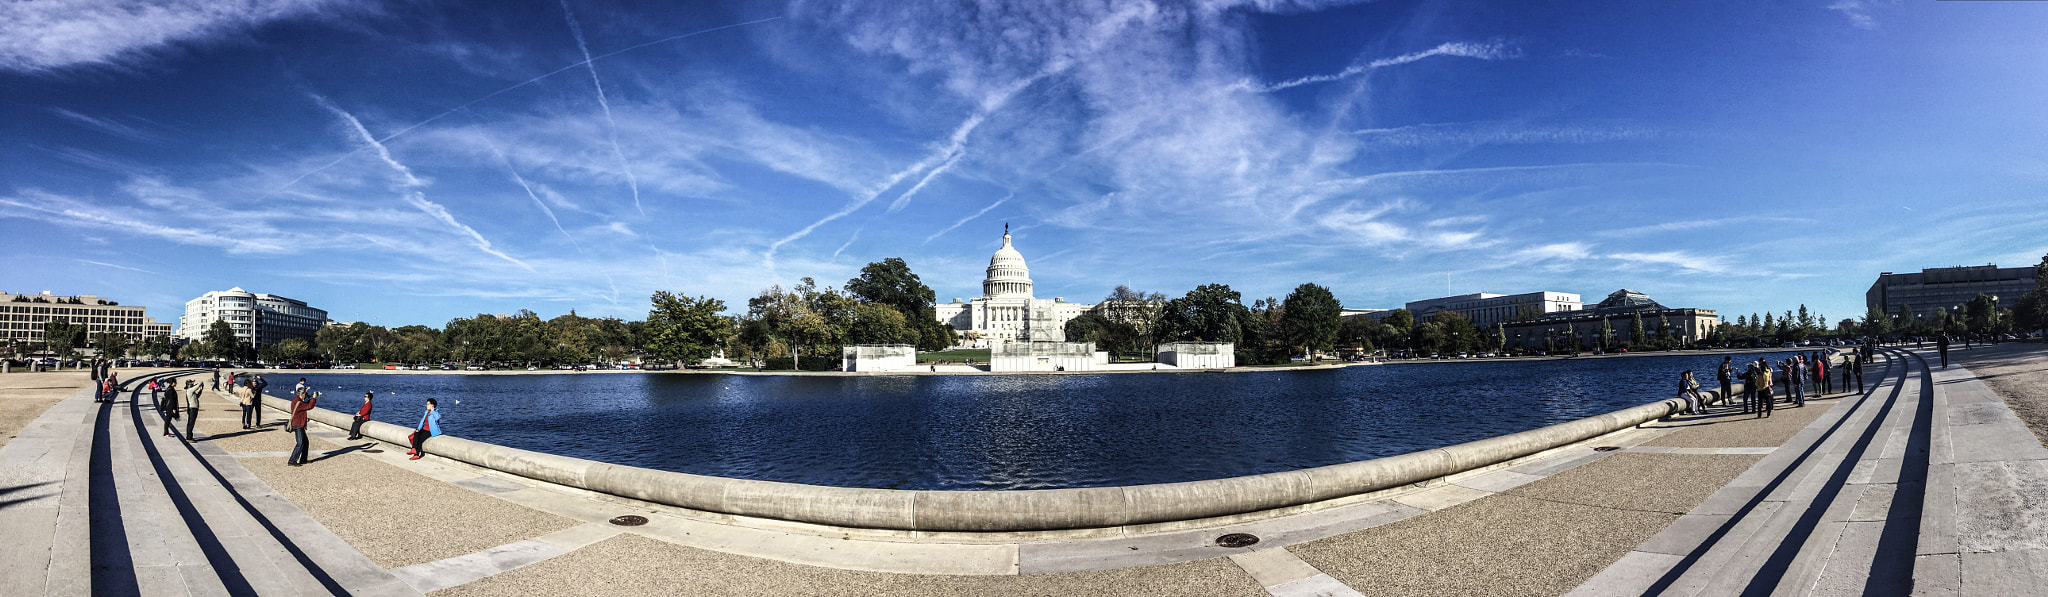 Apple iPad Air 2 sample photo. The capitol building photography